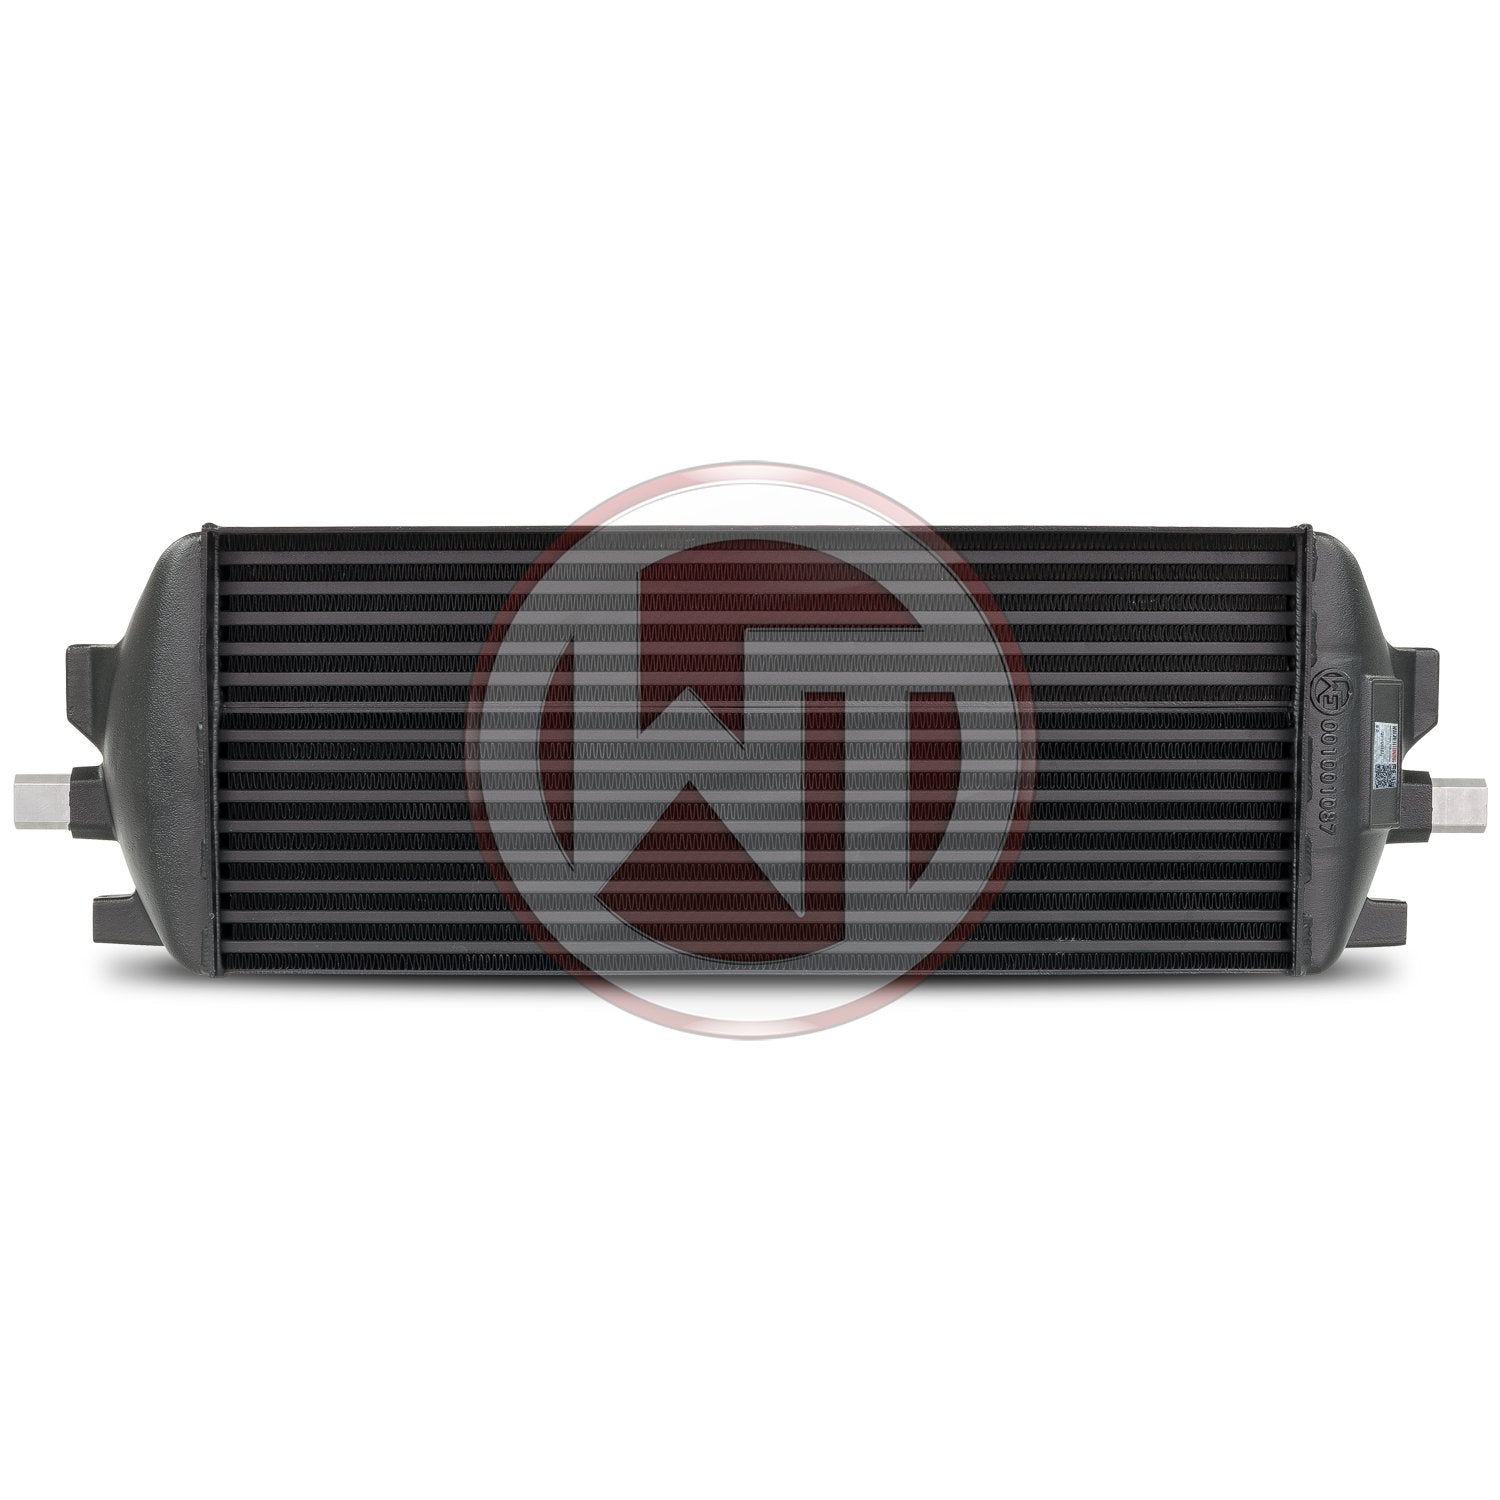 Wagner Tuning BMW 520-540d G Series Competition Intercooler Kit - 200001116